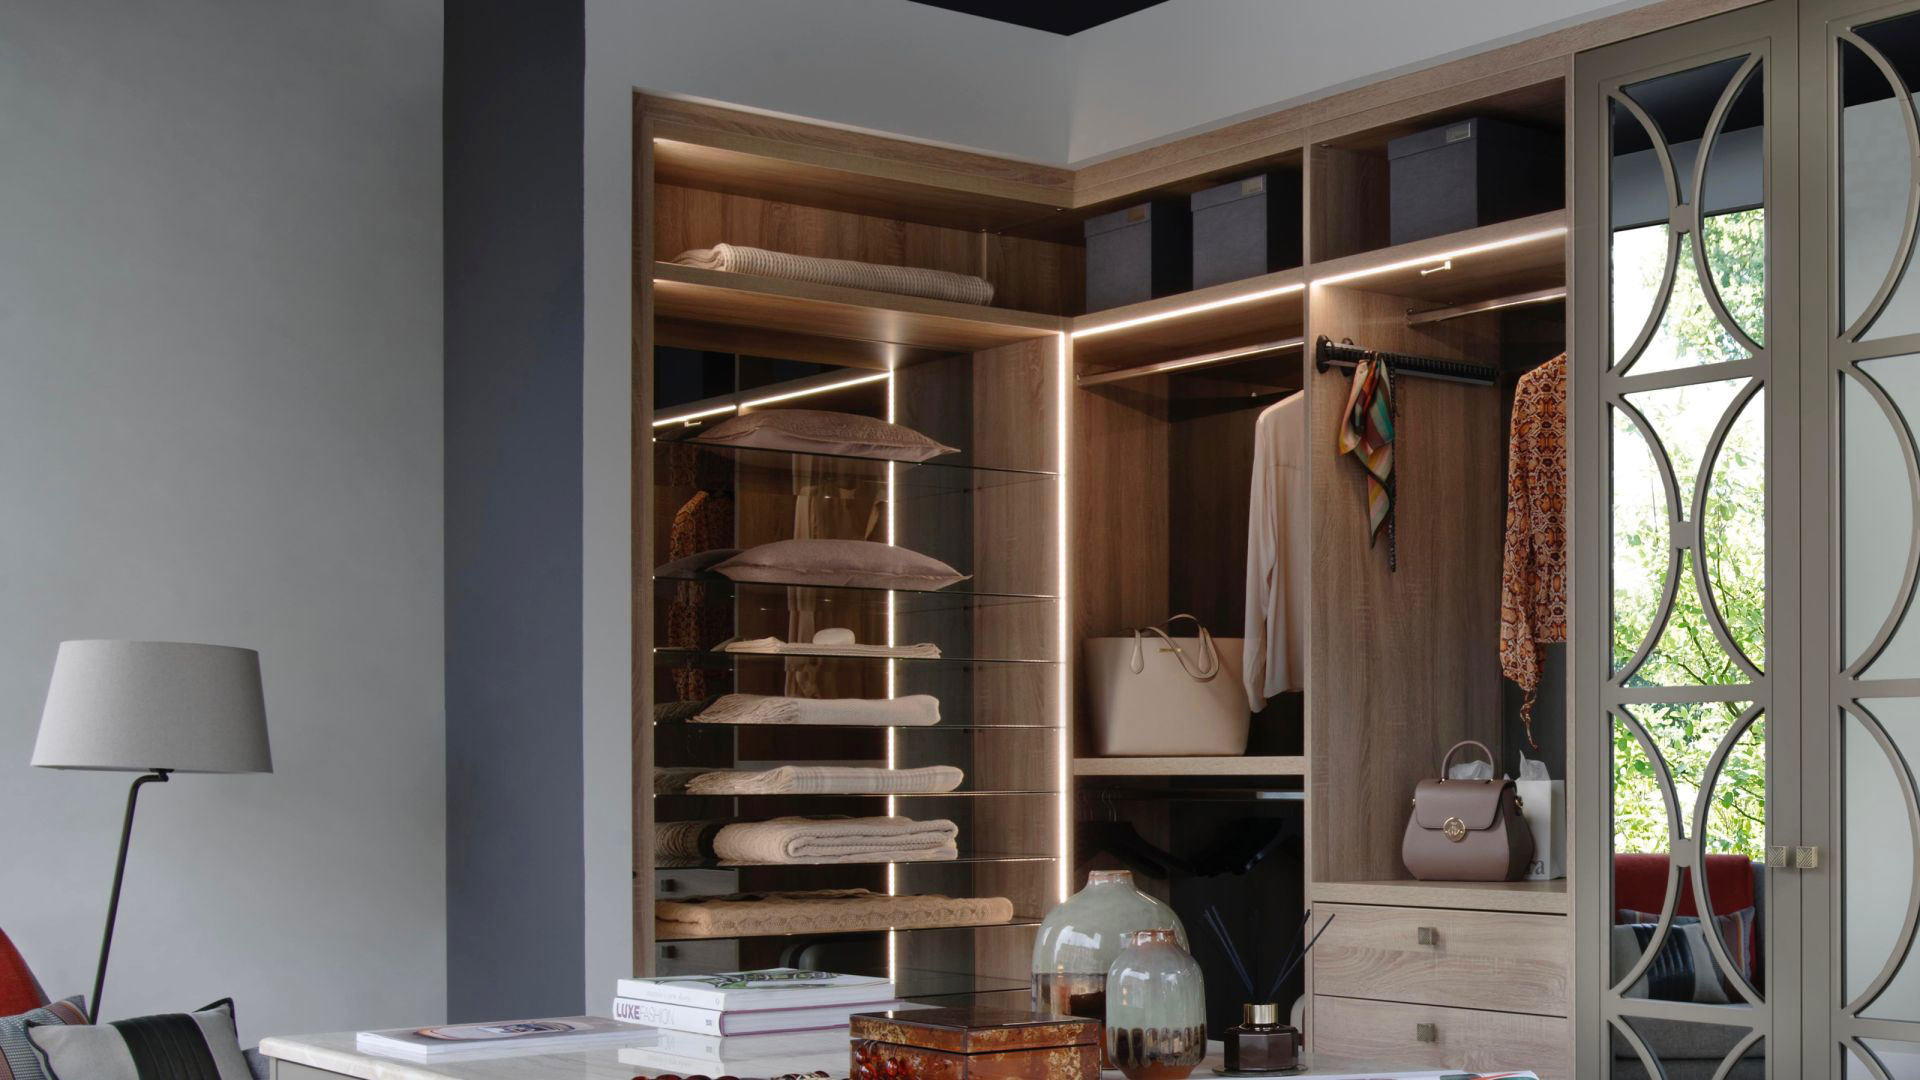 20 Small Walk In Closet Ideas To Organize Clothes In Even The Tiniest Of Bedrooms